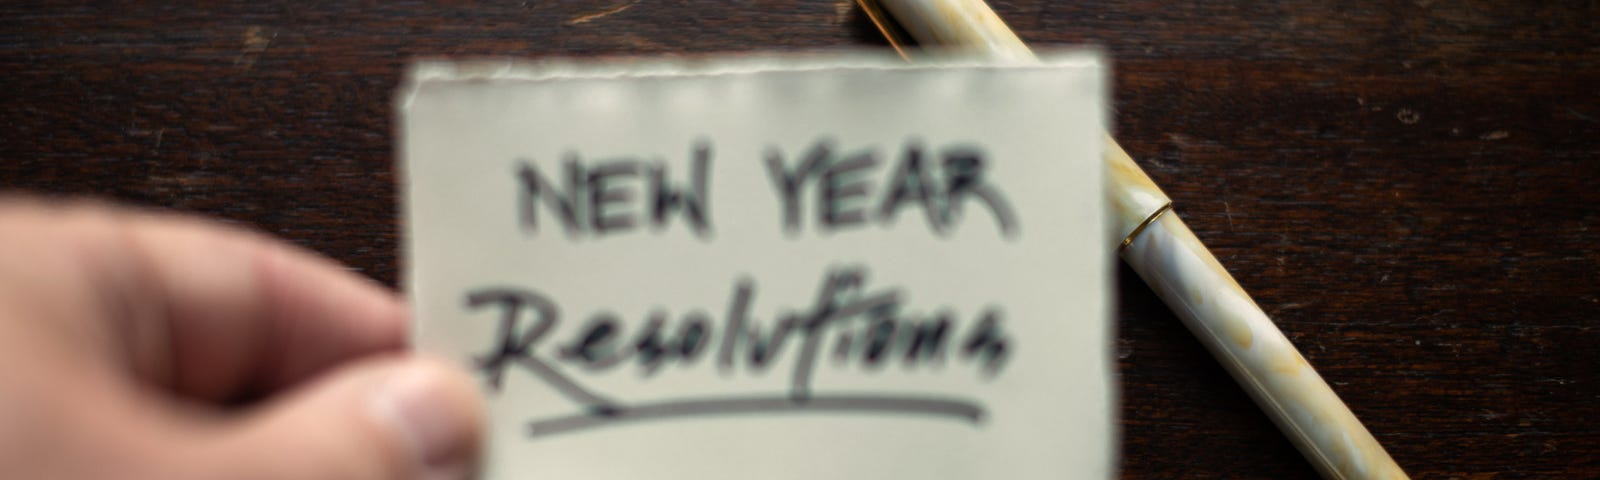 Image of a card that is being held that says “New Year Resolutions”